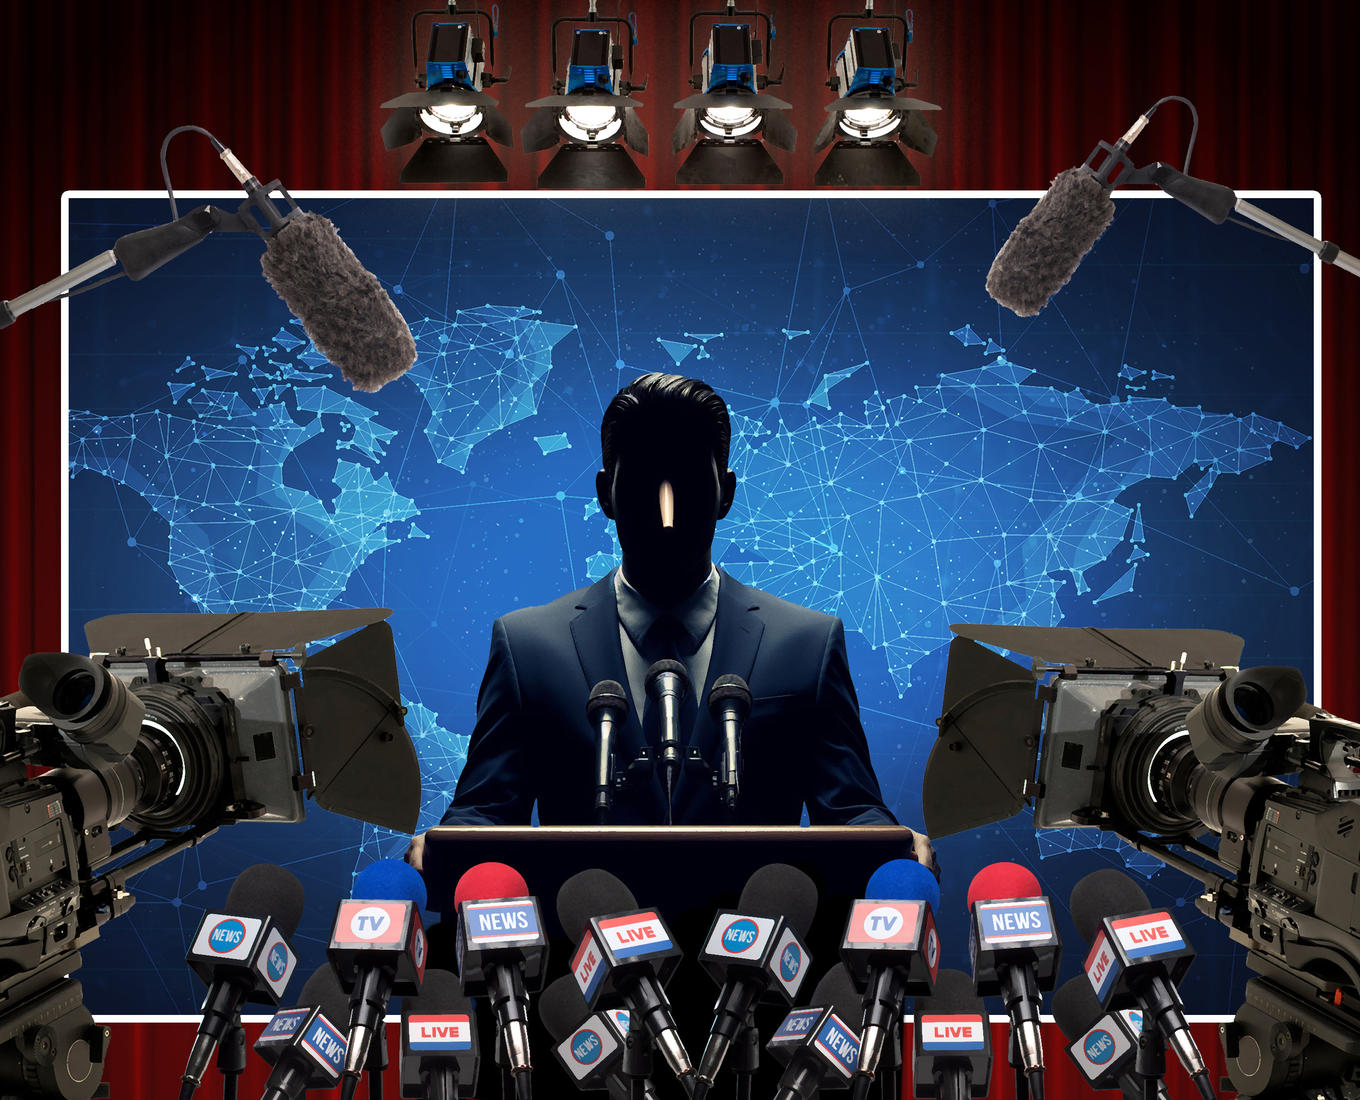 Illustration of a faceless man in suit standing at podium in front of cameras and microphones.